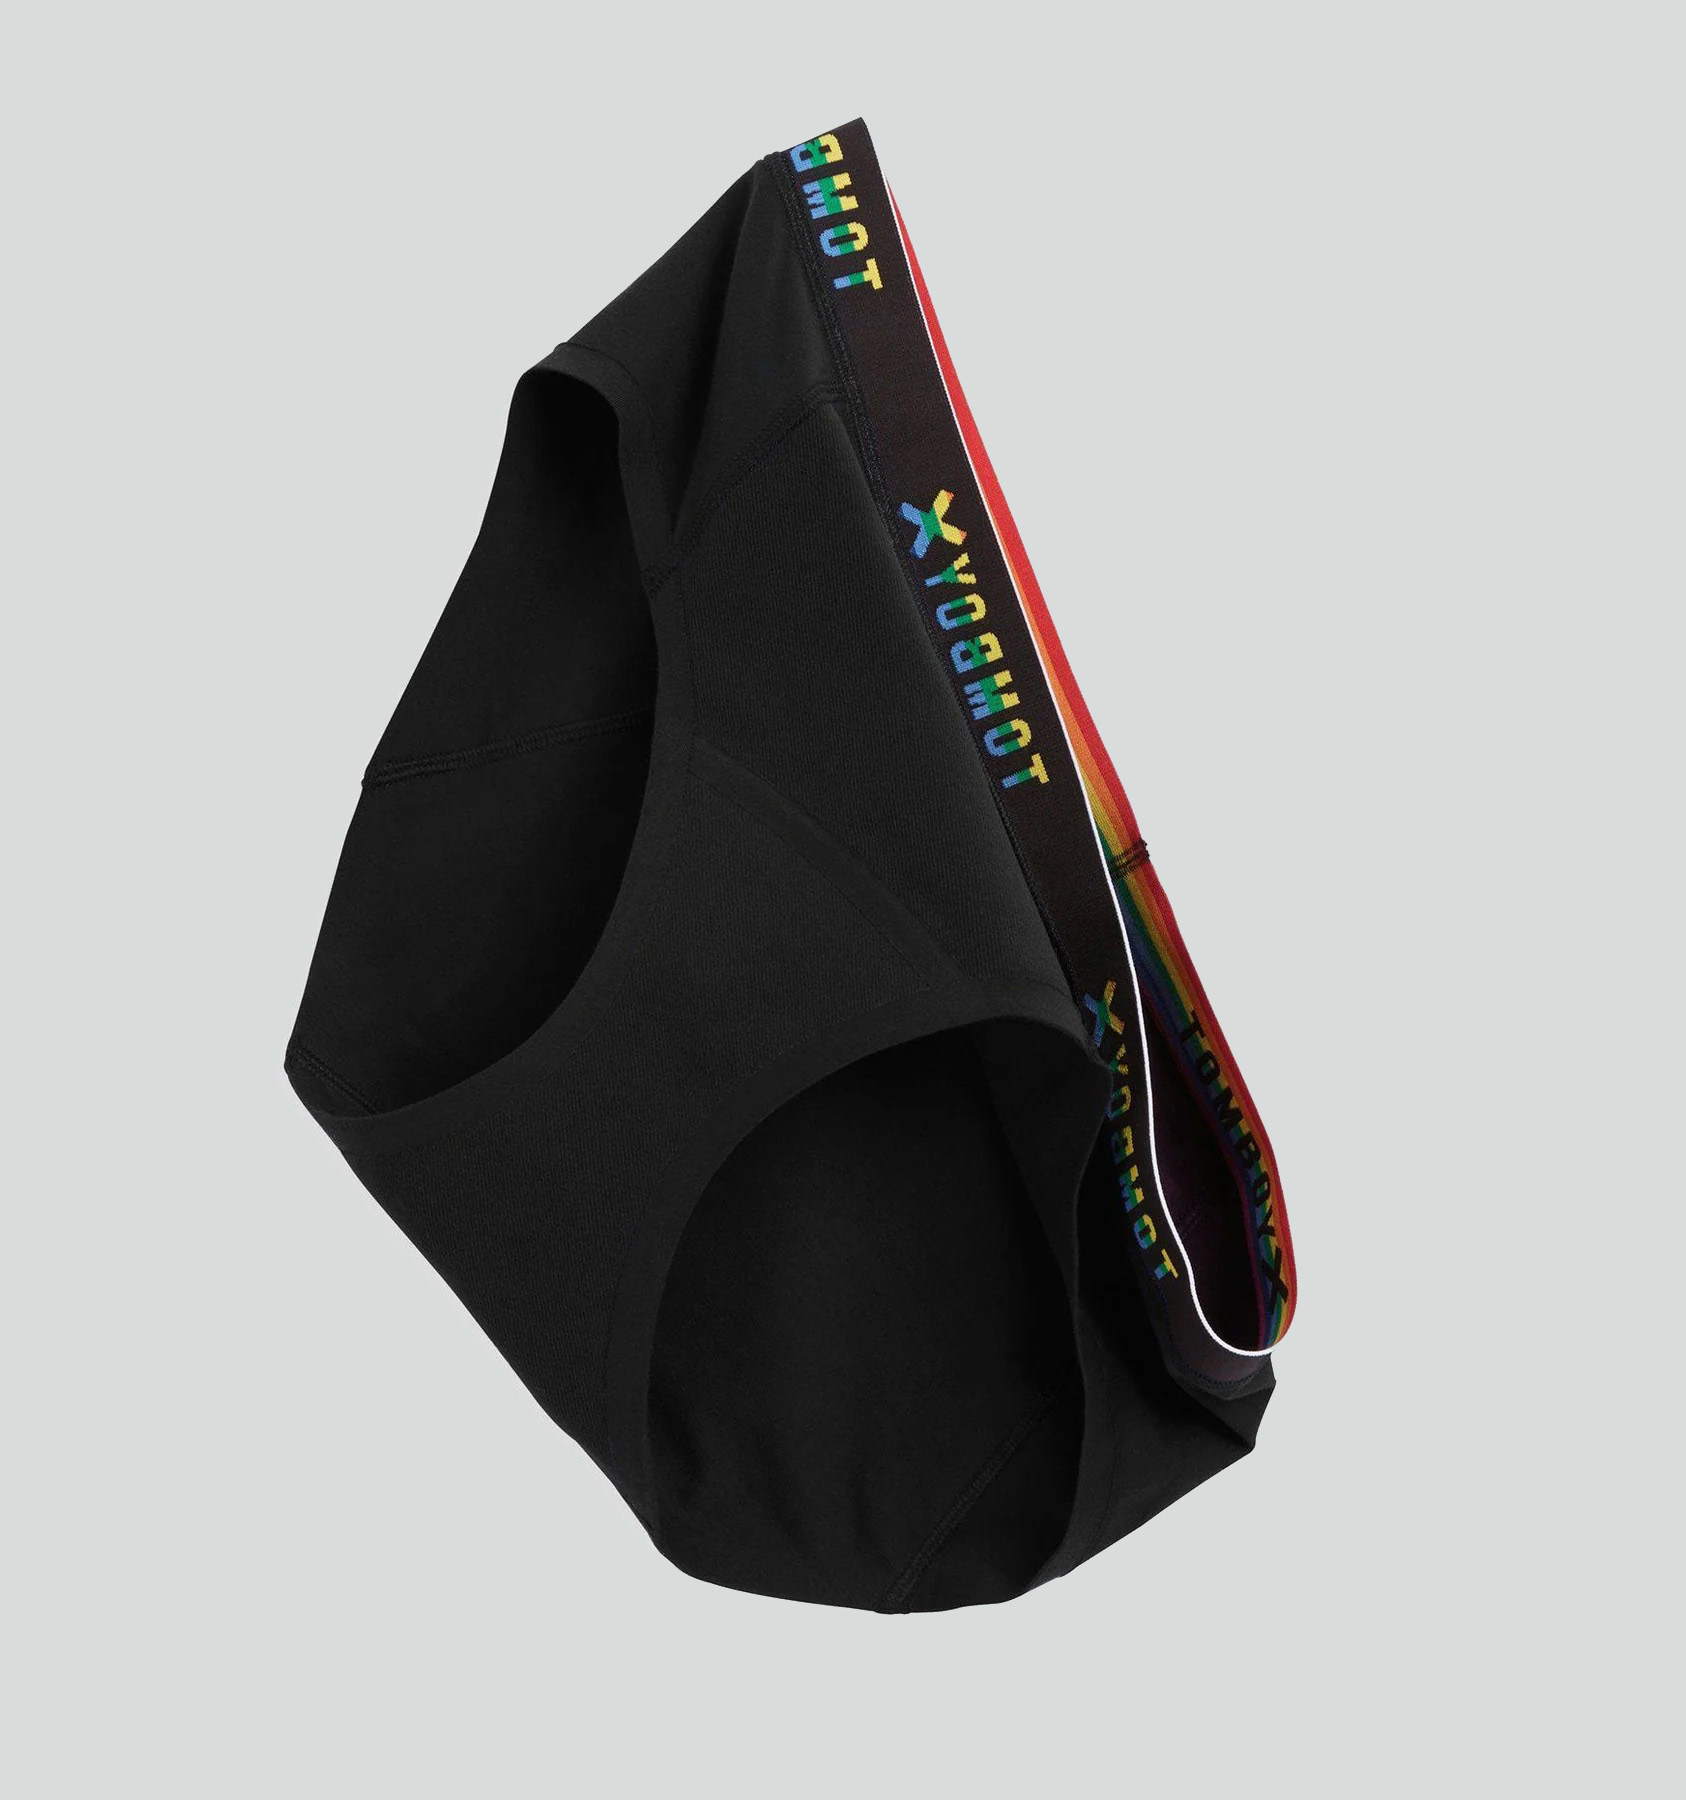 A hanging pair of black TomboyX underwear.